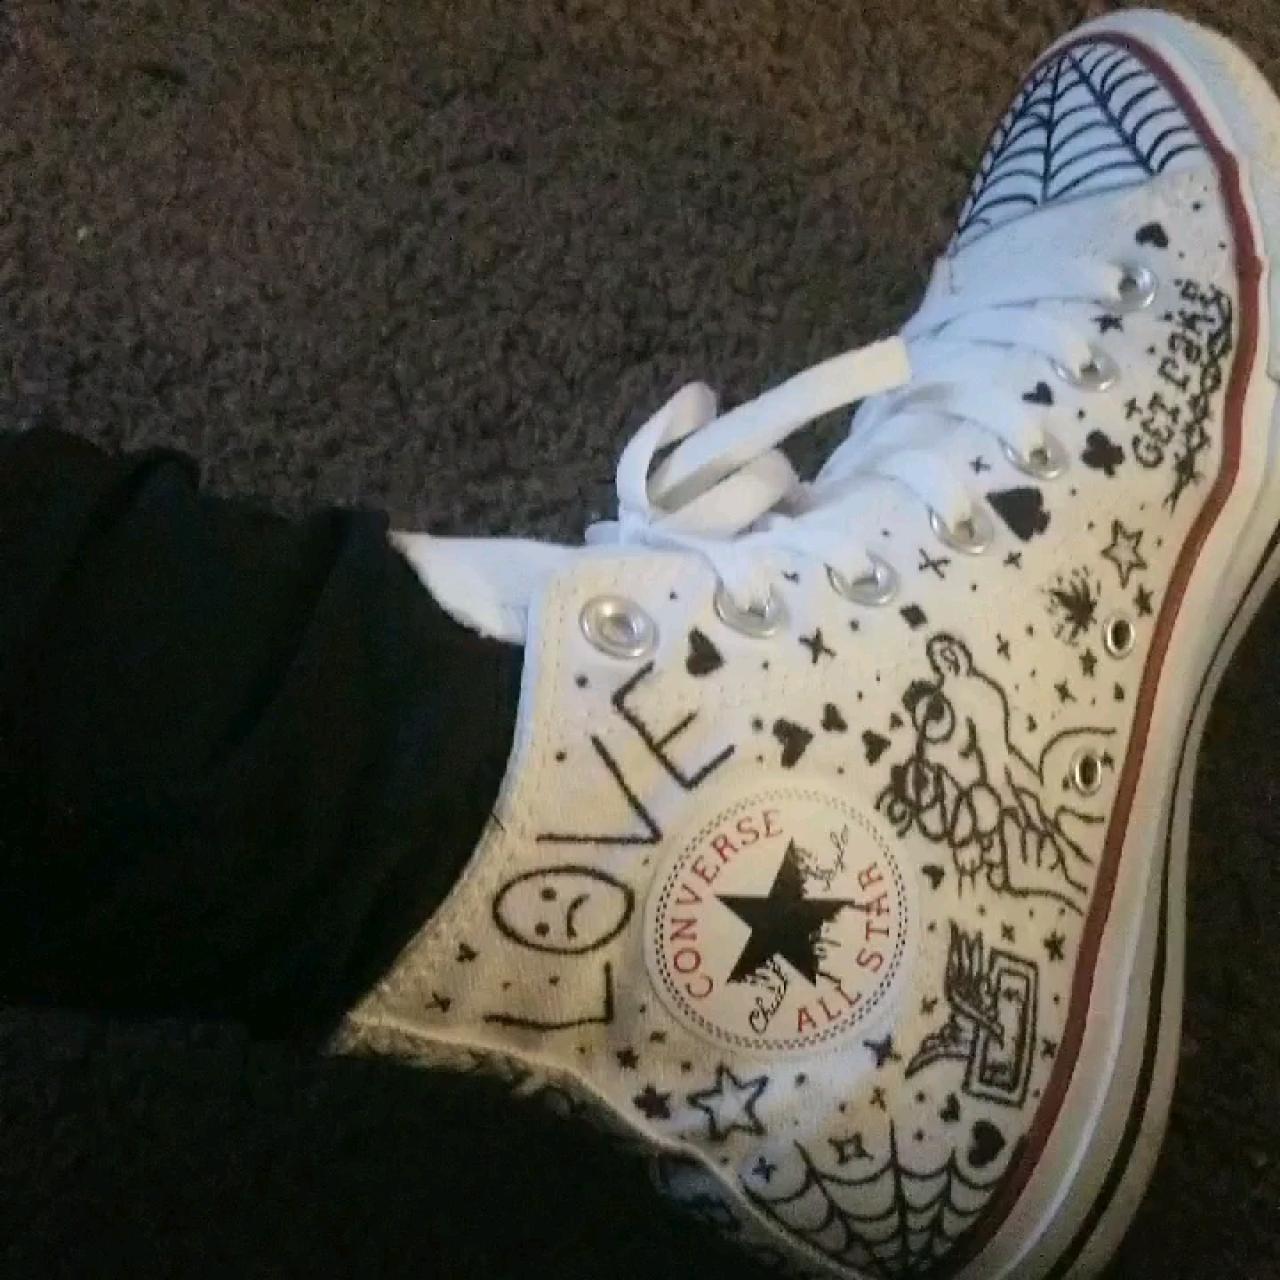 lil peep shoes for sale